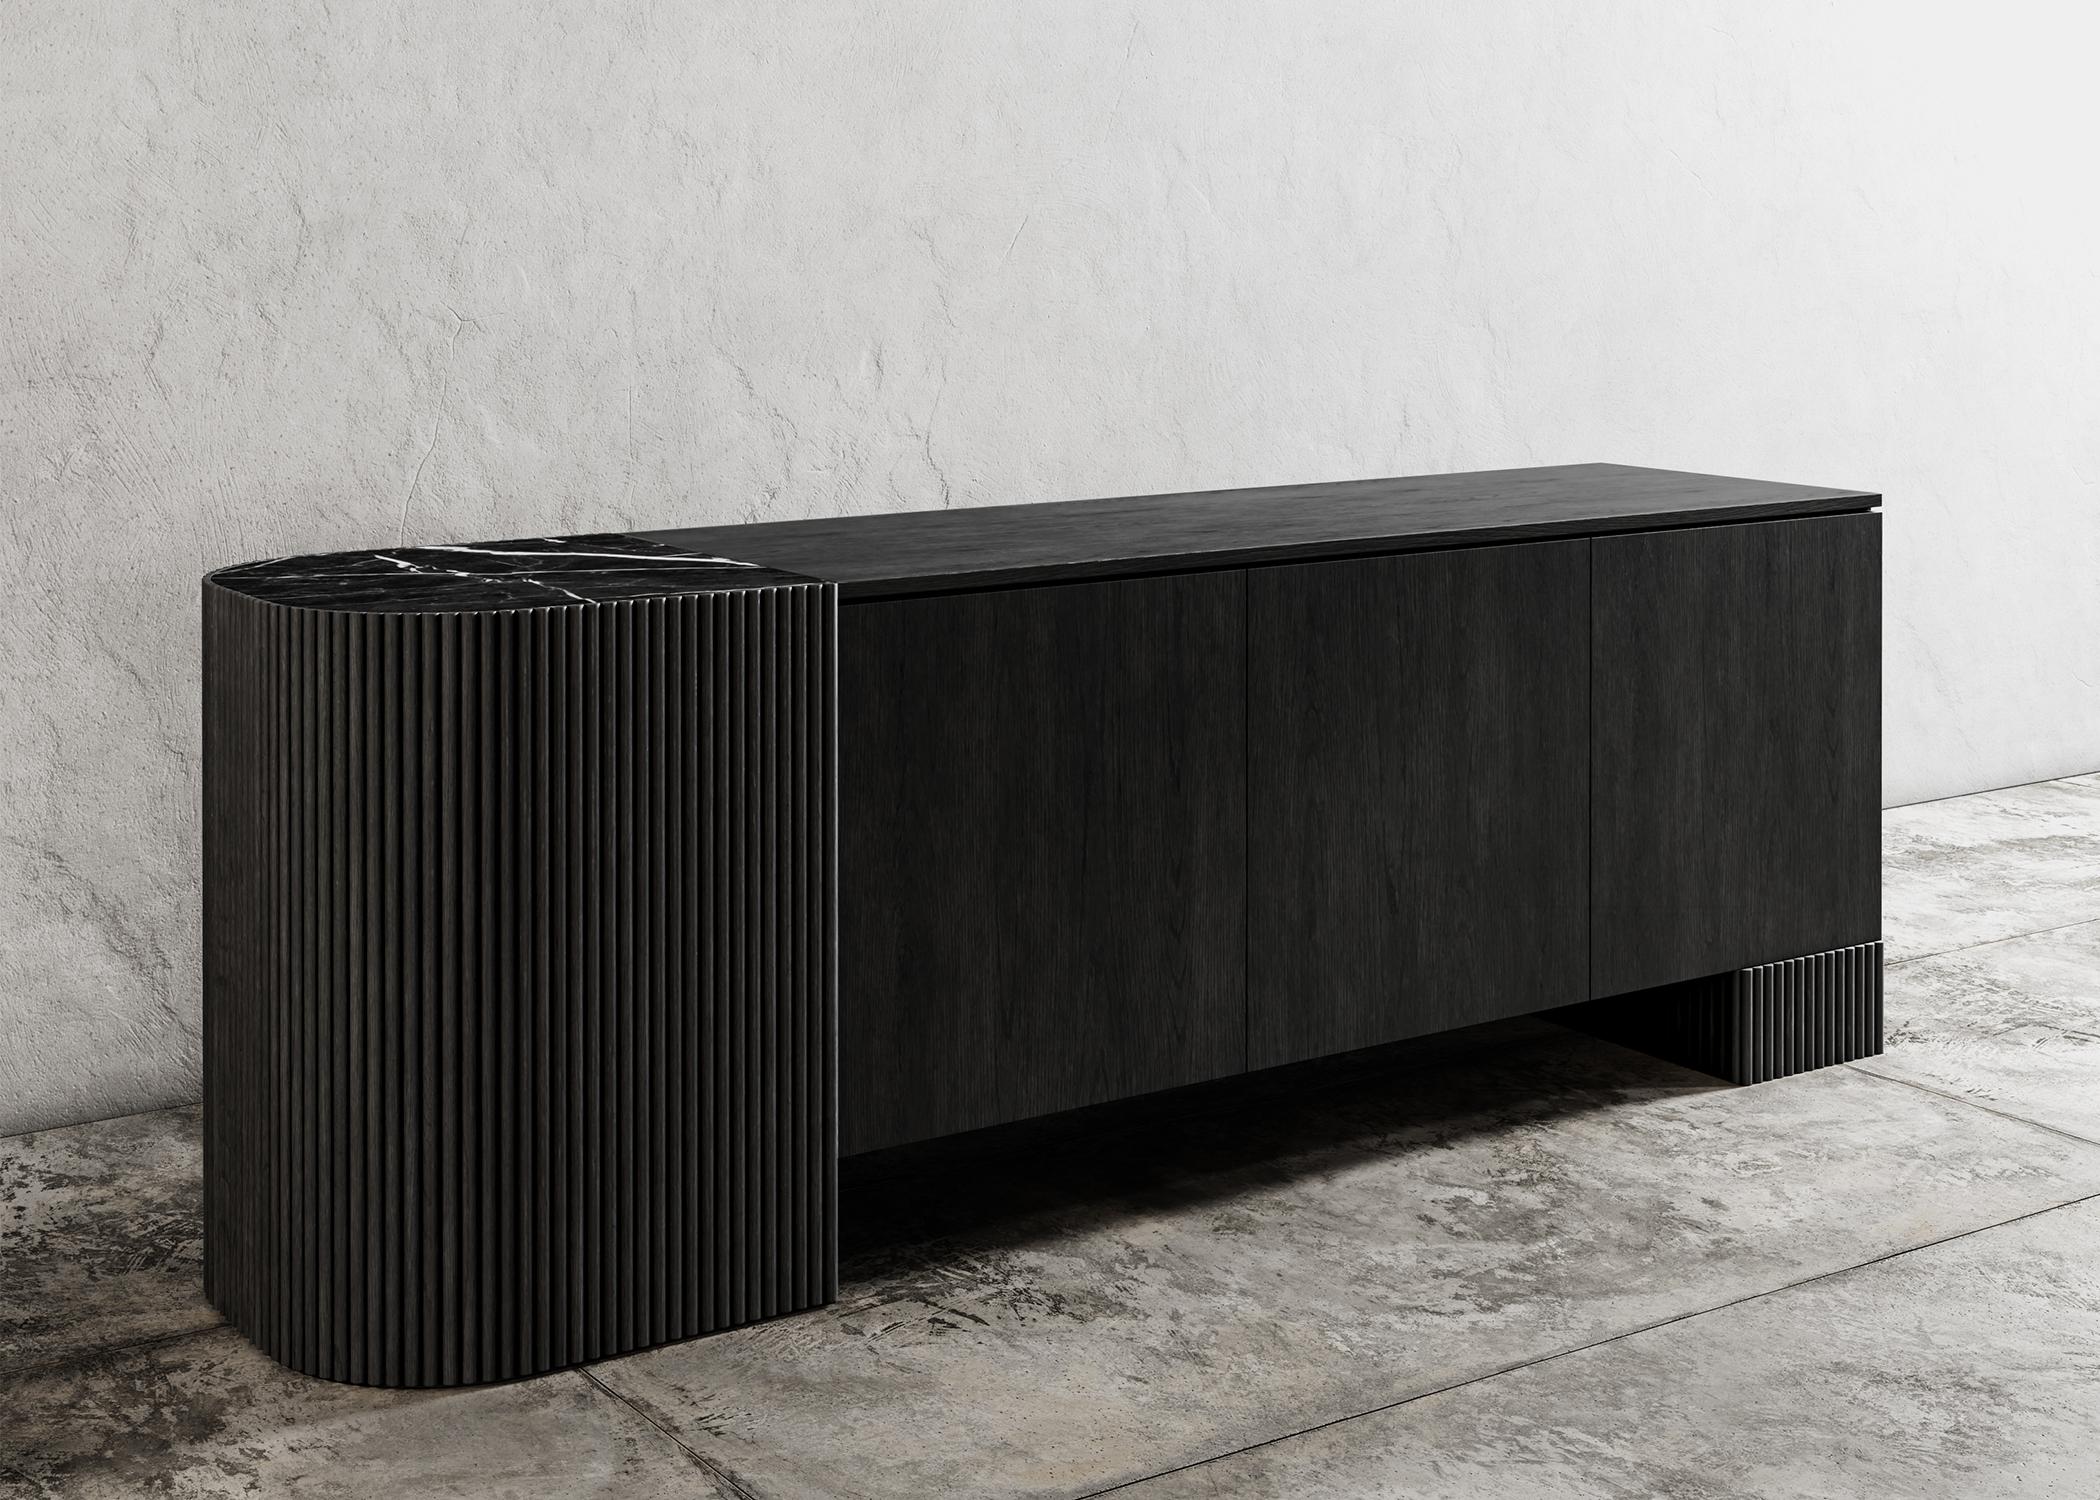 SWAY CREDENZA - Modern Design with Ebony Oak + Nero Marquina Marble

The Sway Credenza is a stylish and modern piece of furniture that will elevate the decor of any living space. Crafted from high-quality Ebony Oak wood and featuring a Nero Marquina